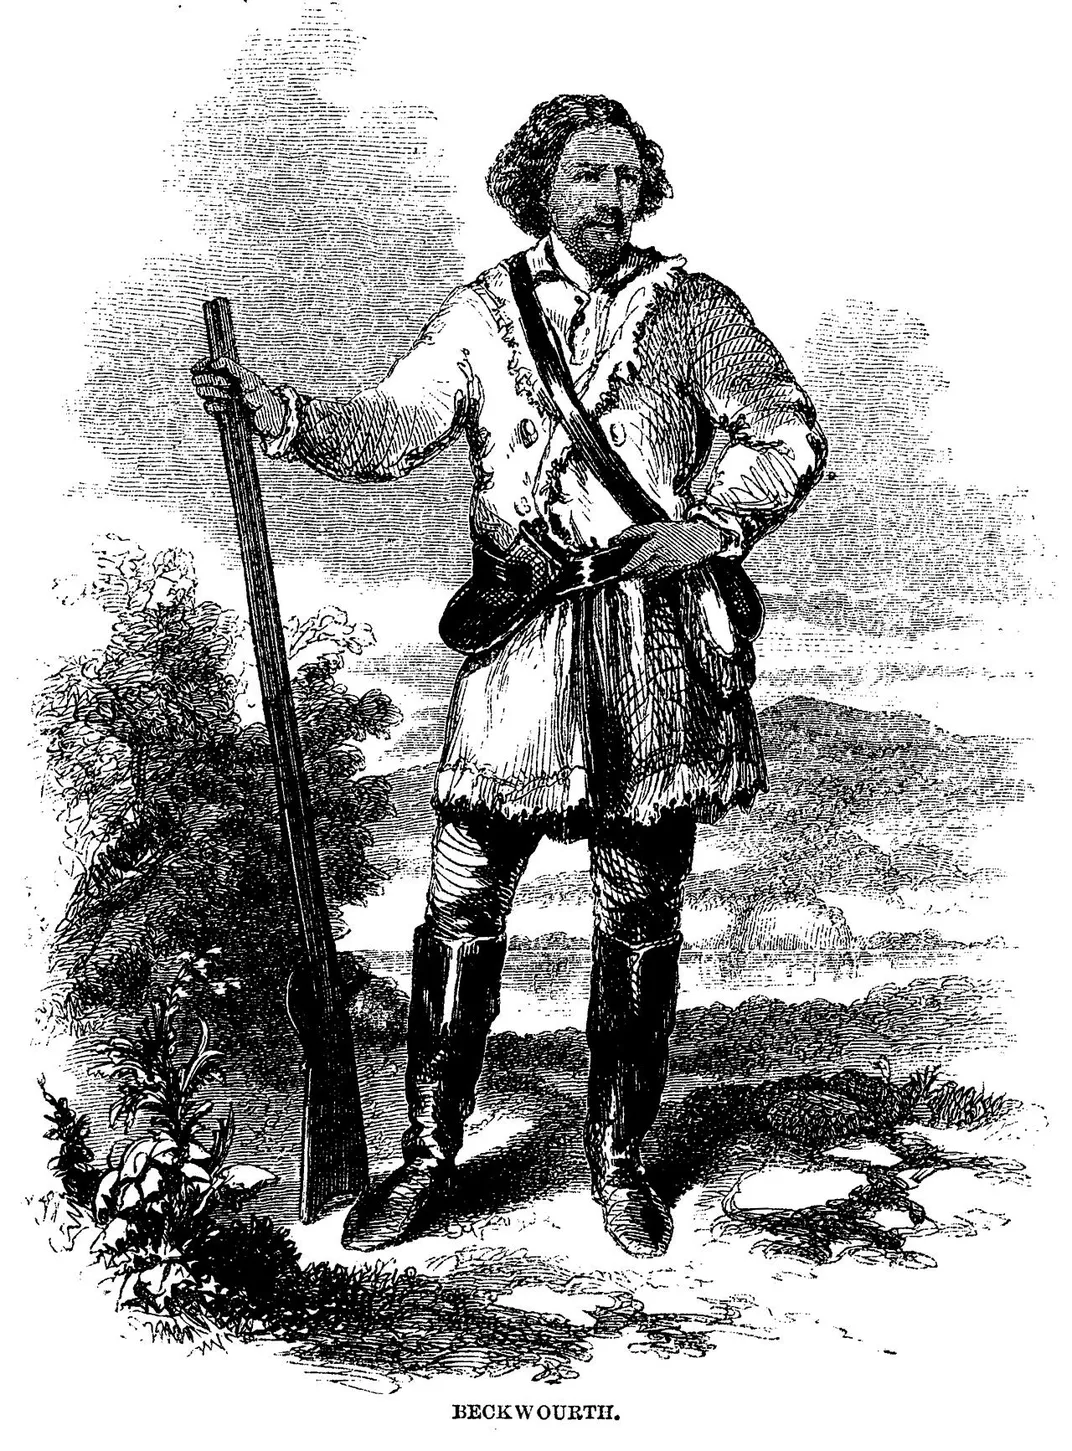 An illustration of Beckwourth as a fur trapper